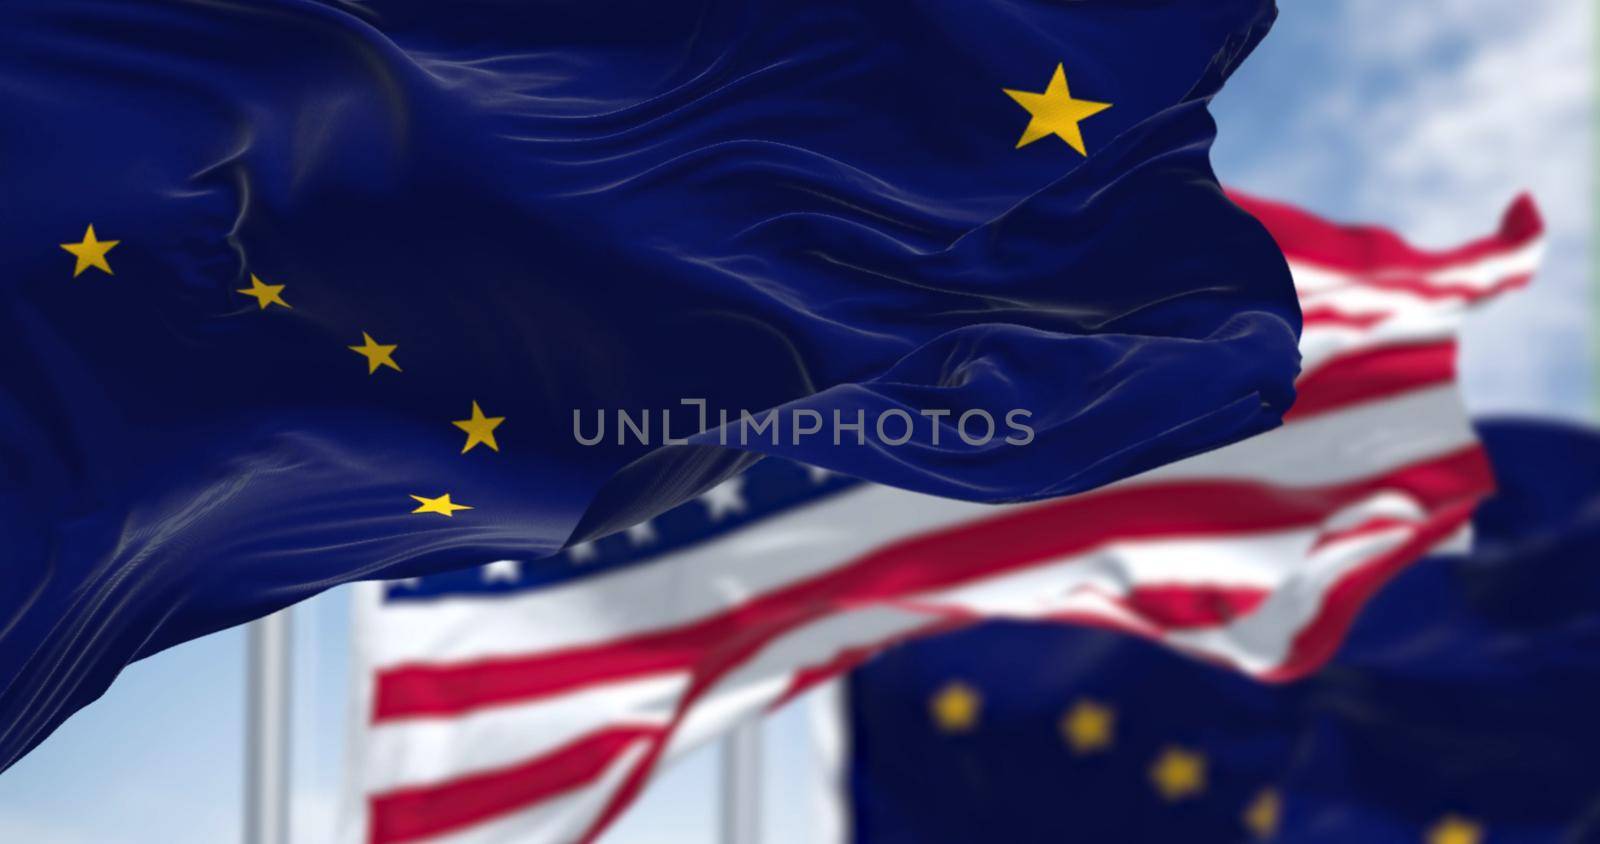 The flags of the Alaska state and United States waving in the wind. by rarrarorro